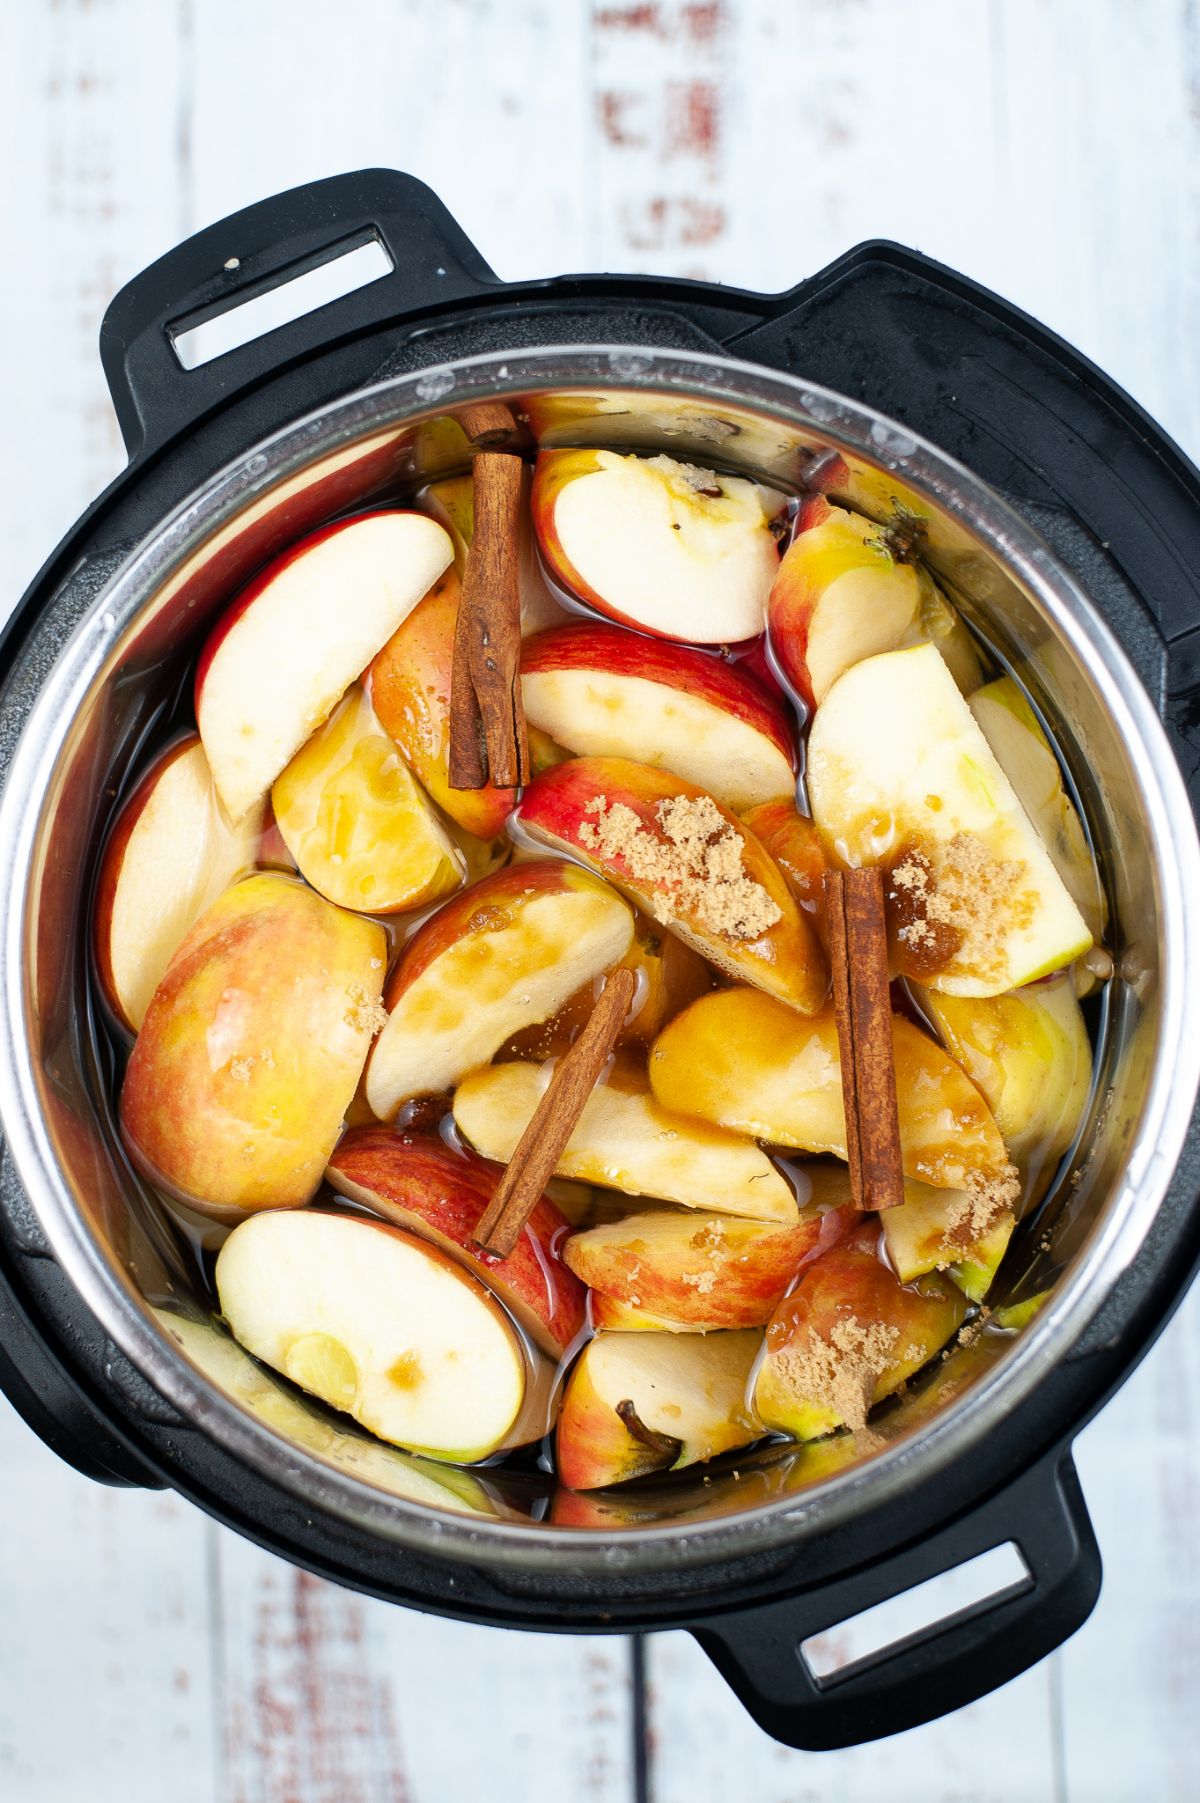 Sliced apples, cinnamon barks, sugar and water in an Instant Pot.